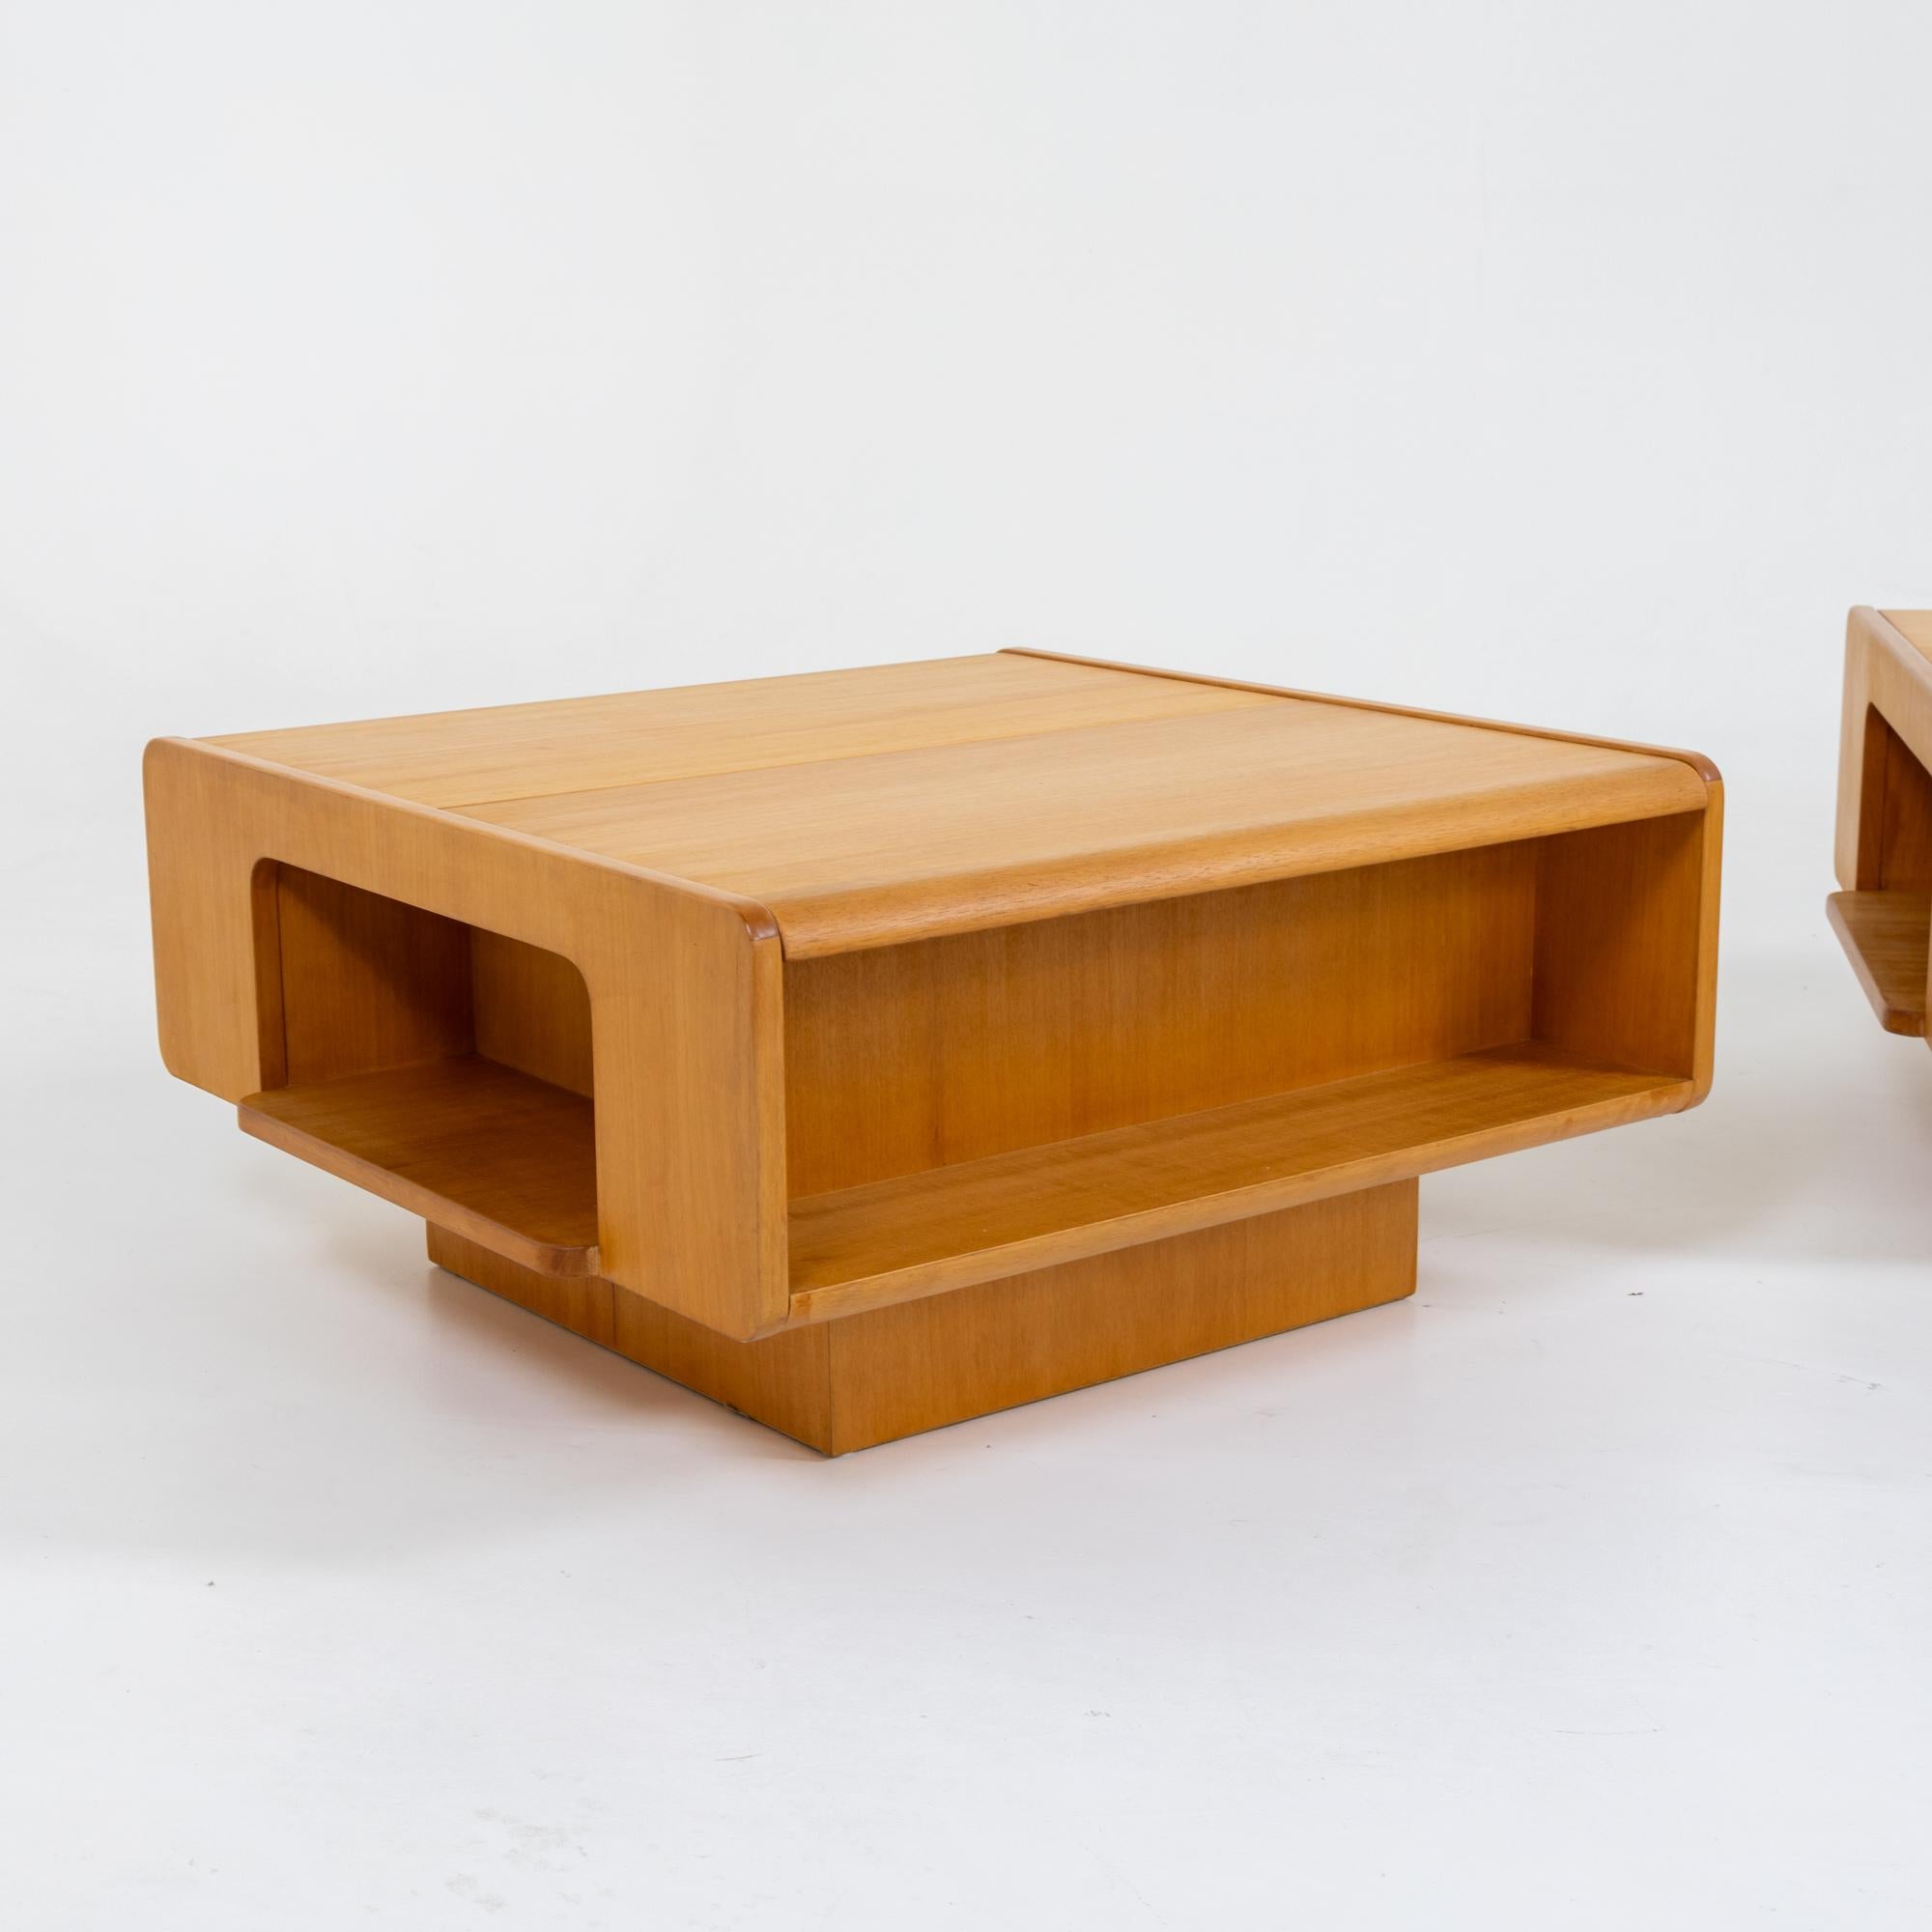 Pair of wooden coffee tables with sliding table top and internal storage space. The rectangular carcasses are provided with additional storage space on the sides and have an interesting view from all sides.